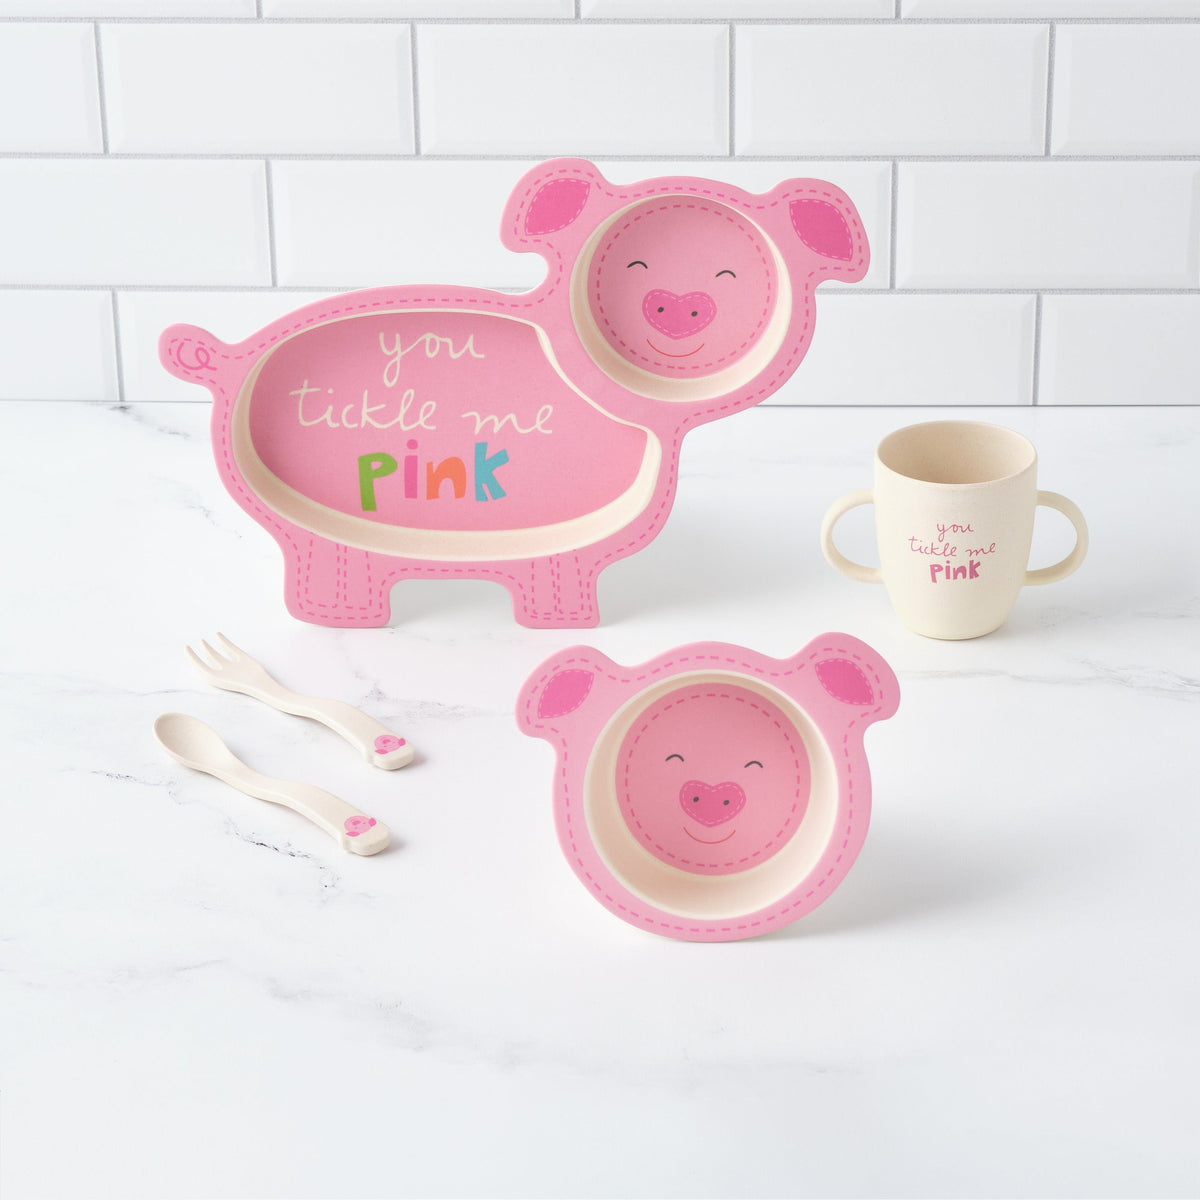 Bamboozle Home Penelope Pig by Bamboozle Home